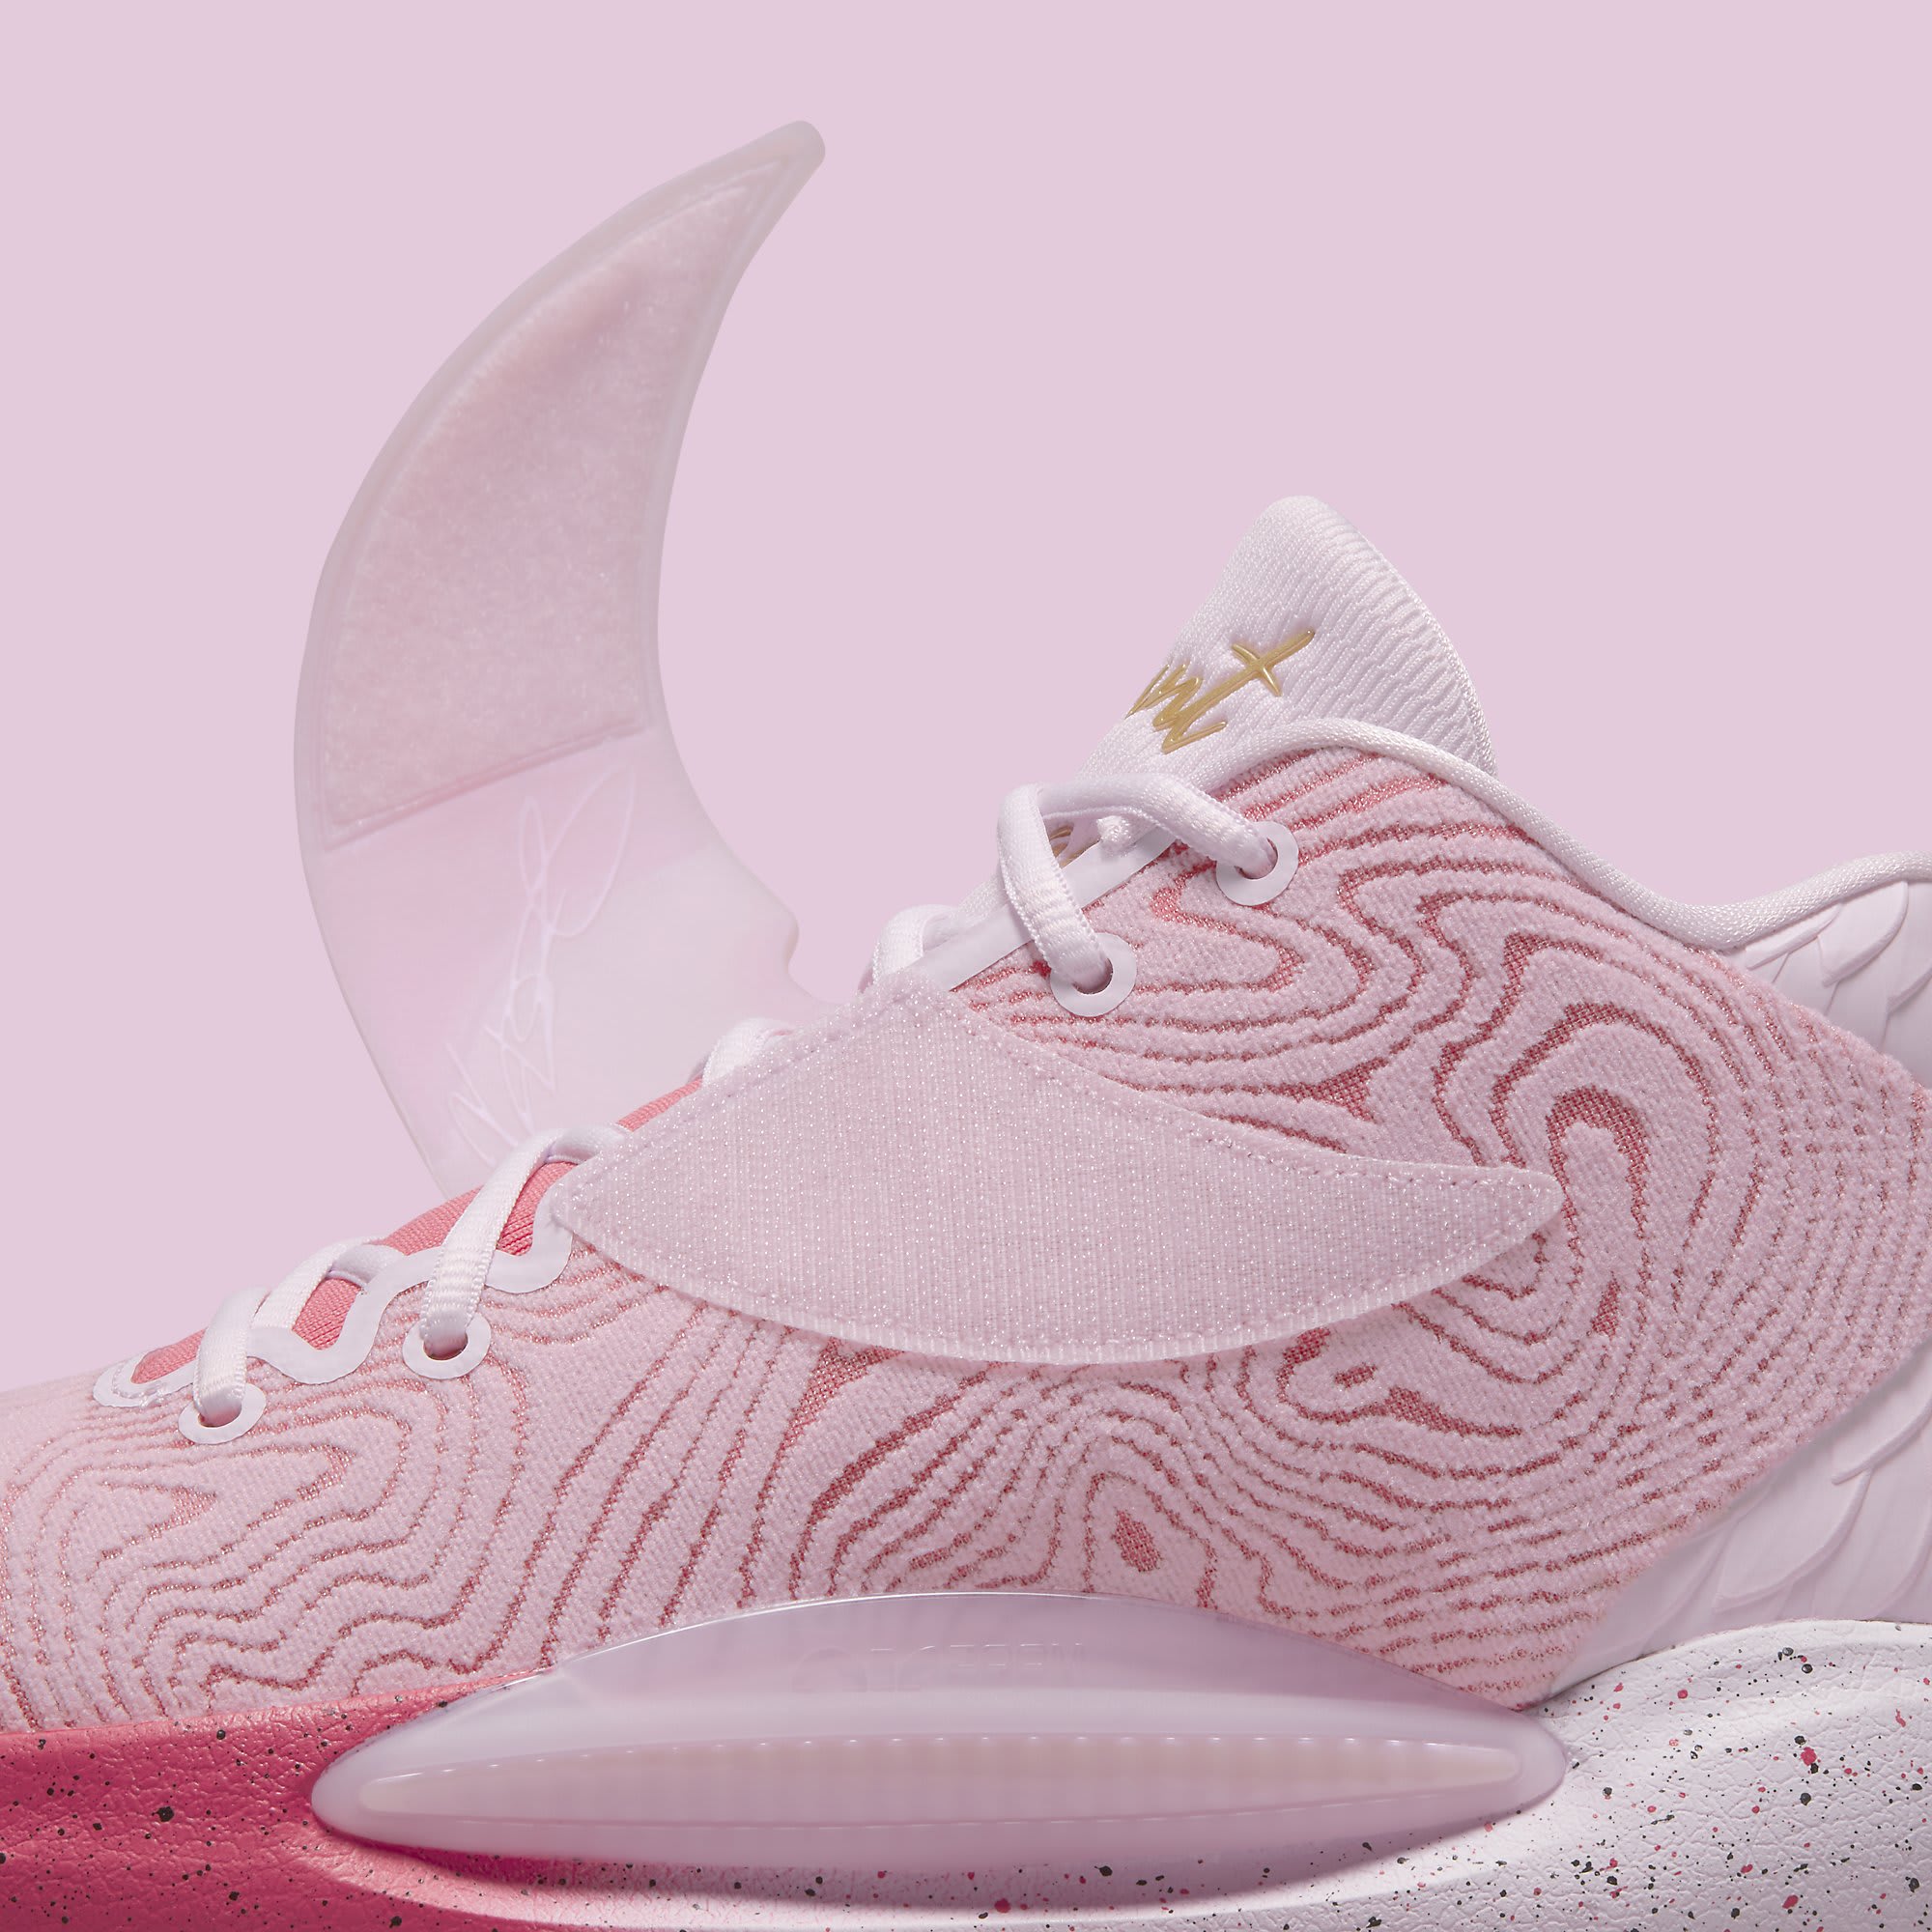 Nike KD 14 'Aunt Pearl' DC9379 600 Lateral